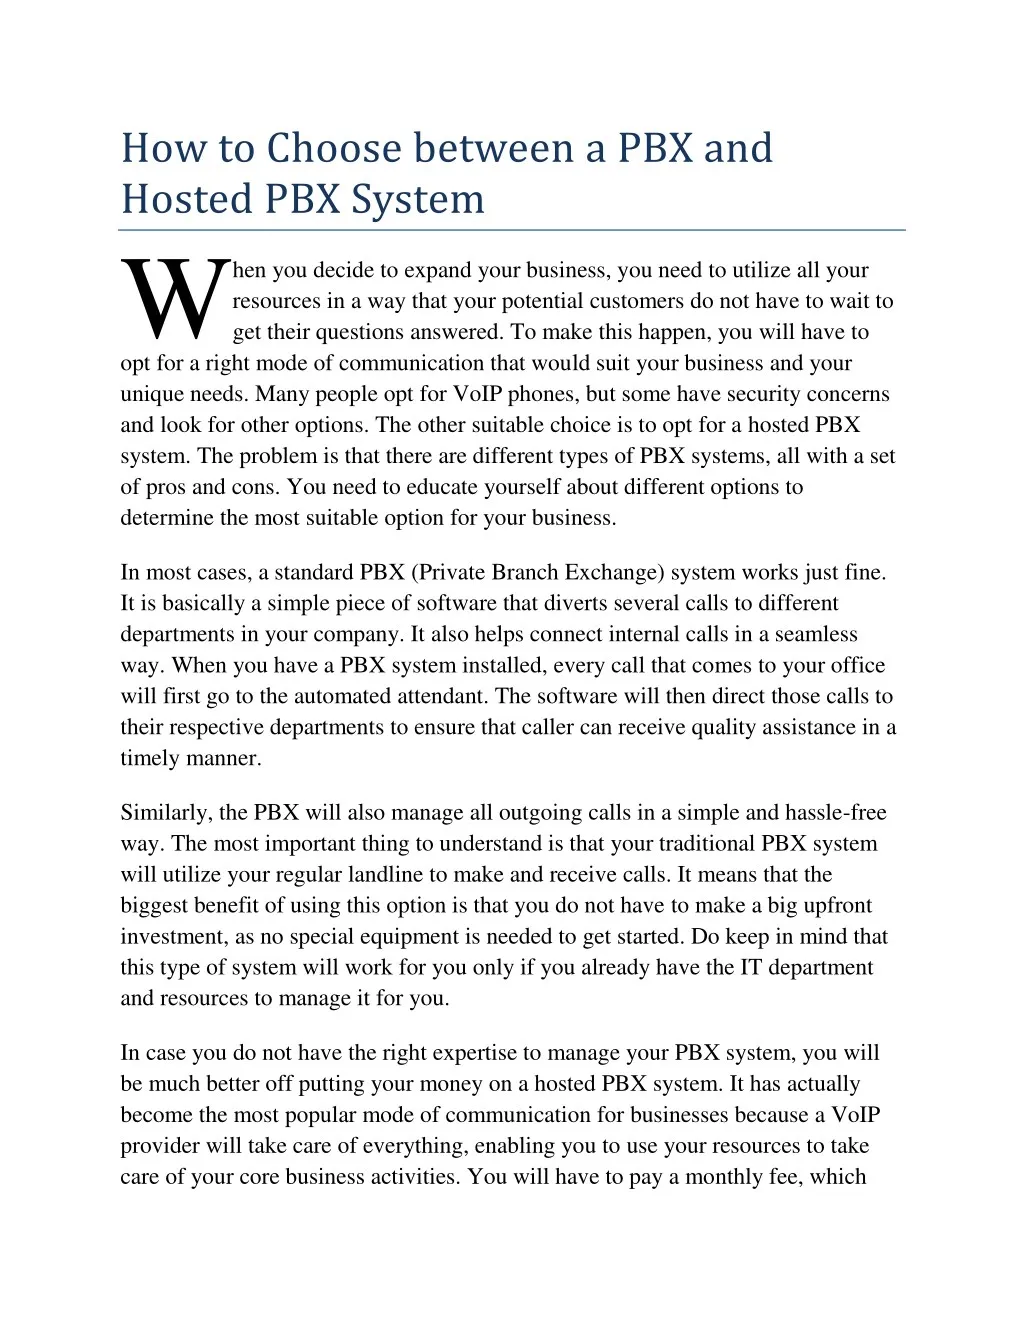 how to choose between a pbx and hosted pbx system